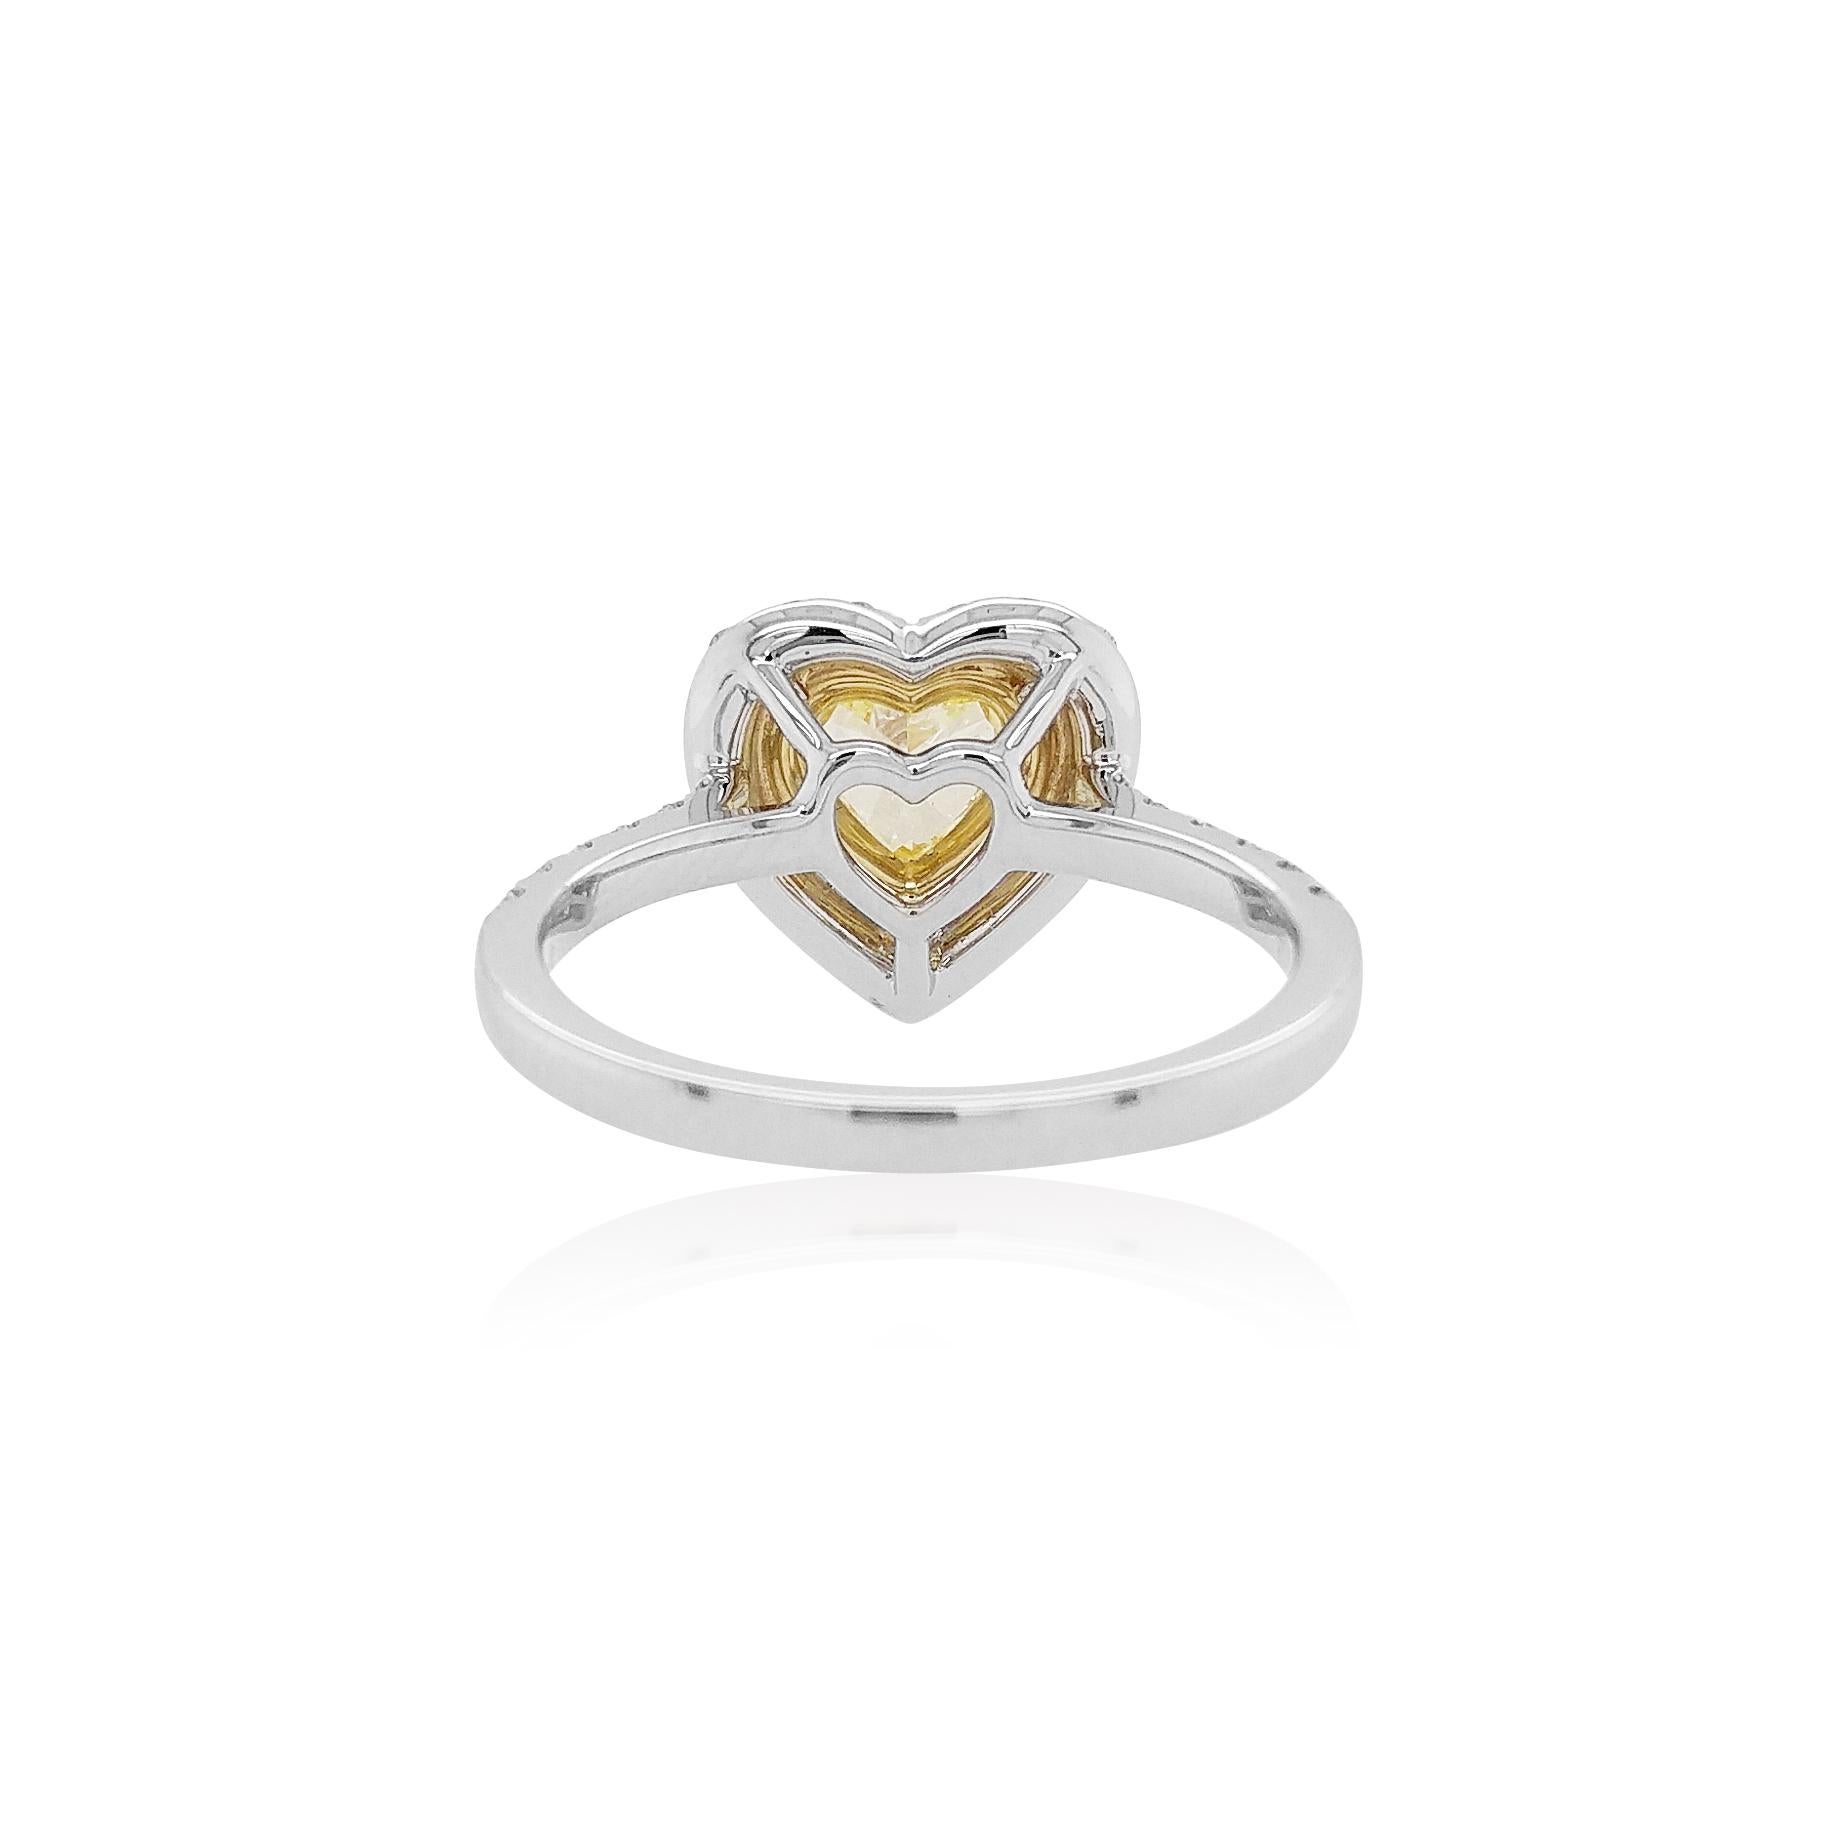 This lovely ring features lustrous Fancy Yellow Diamond above a playful diamond heart motif. Contemporary and elegant, this ring will add a touch of precious and tenderness whenever they are worn. The perfect gift for a loved one, this ring will